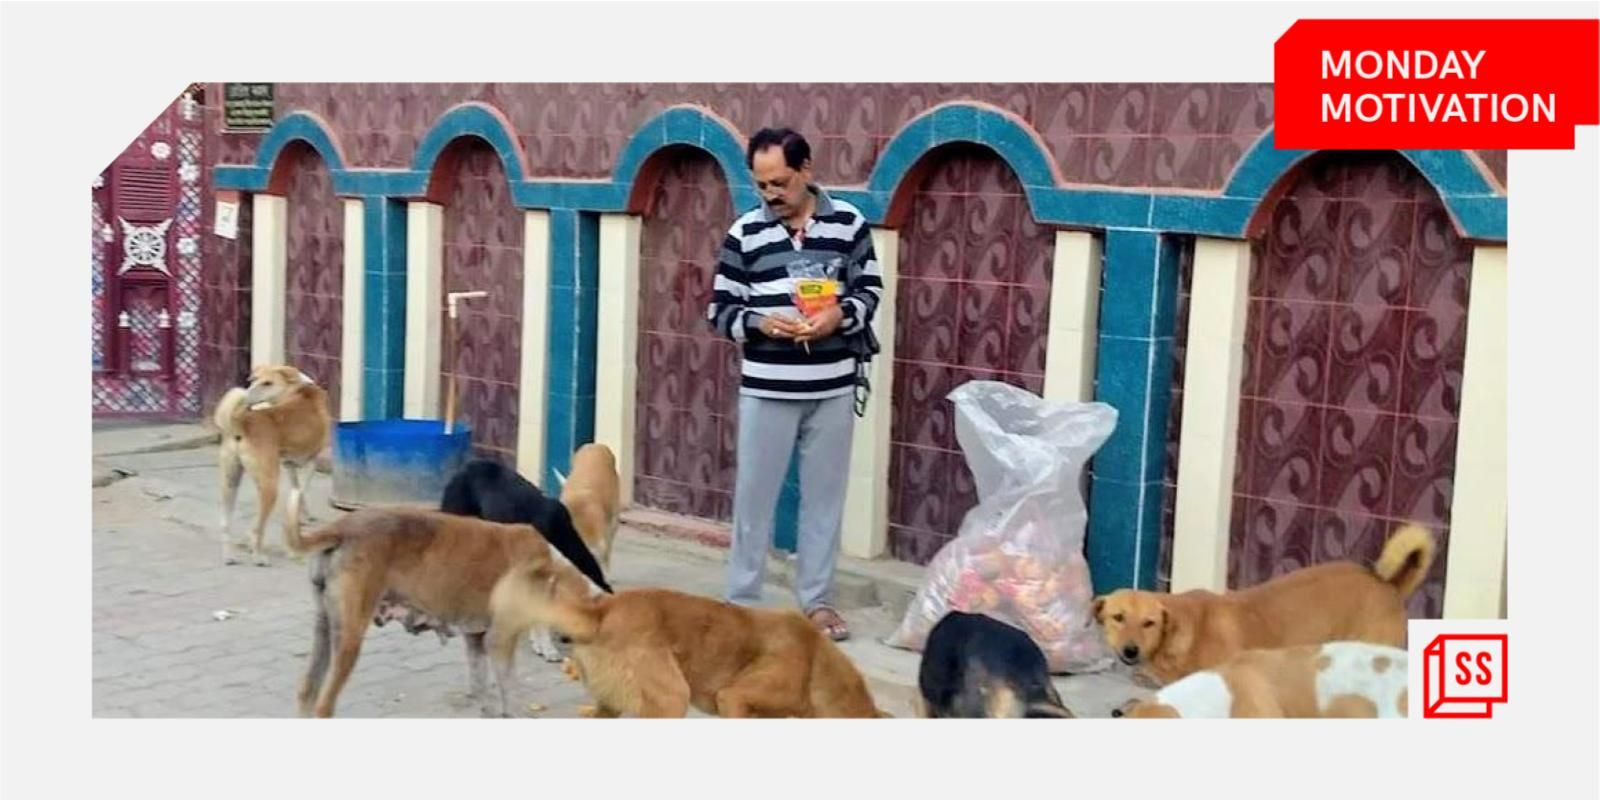 [Monday Motivation] Meet the man who has been feeding strays every day for more than 26 years now